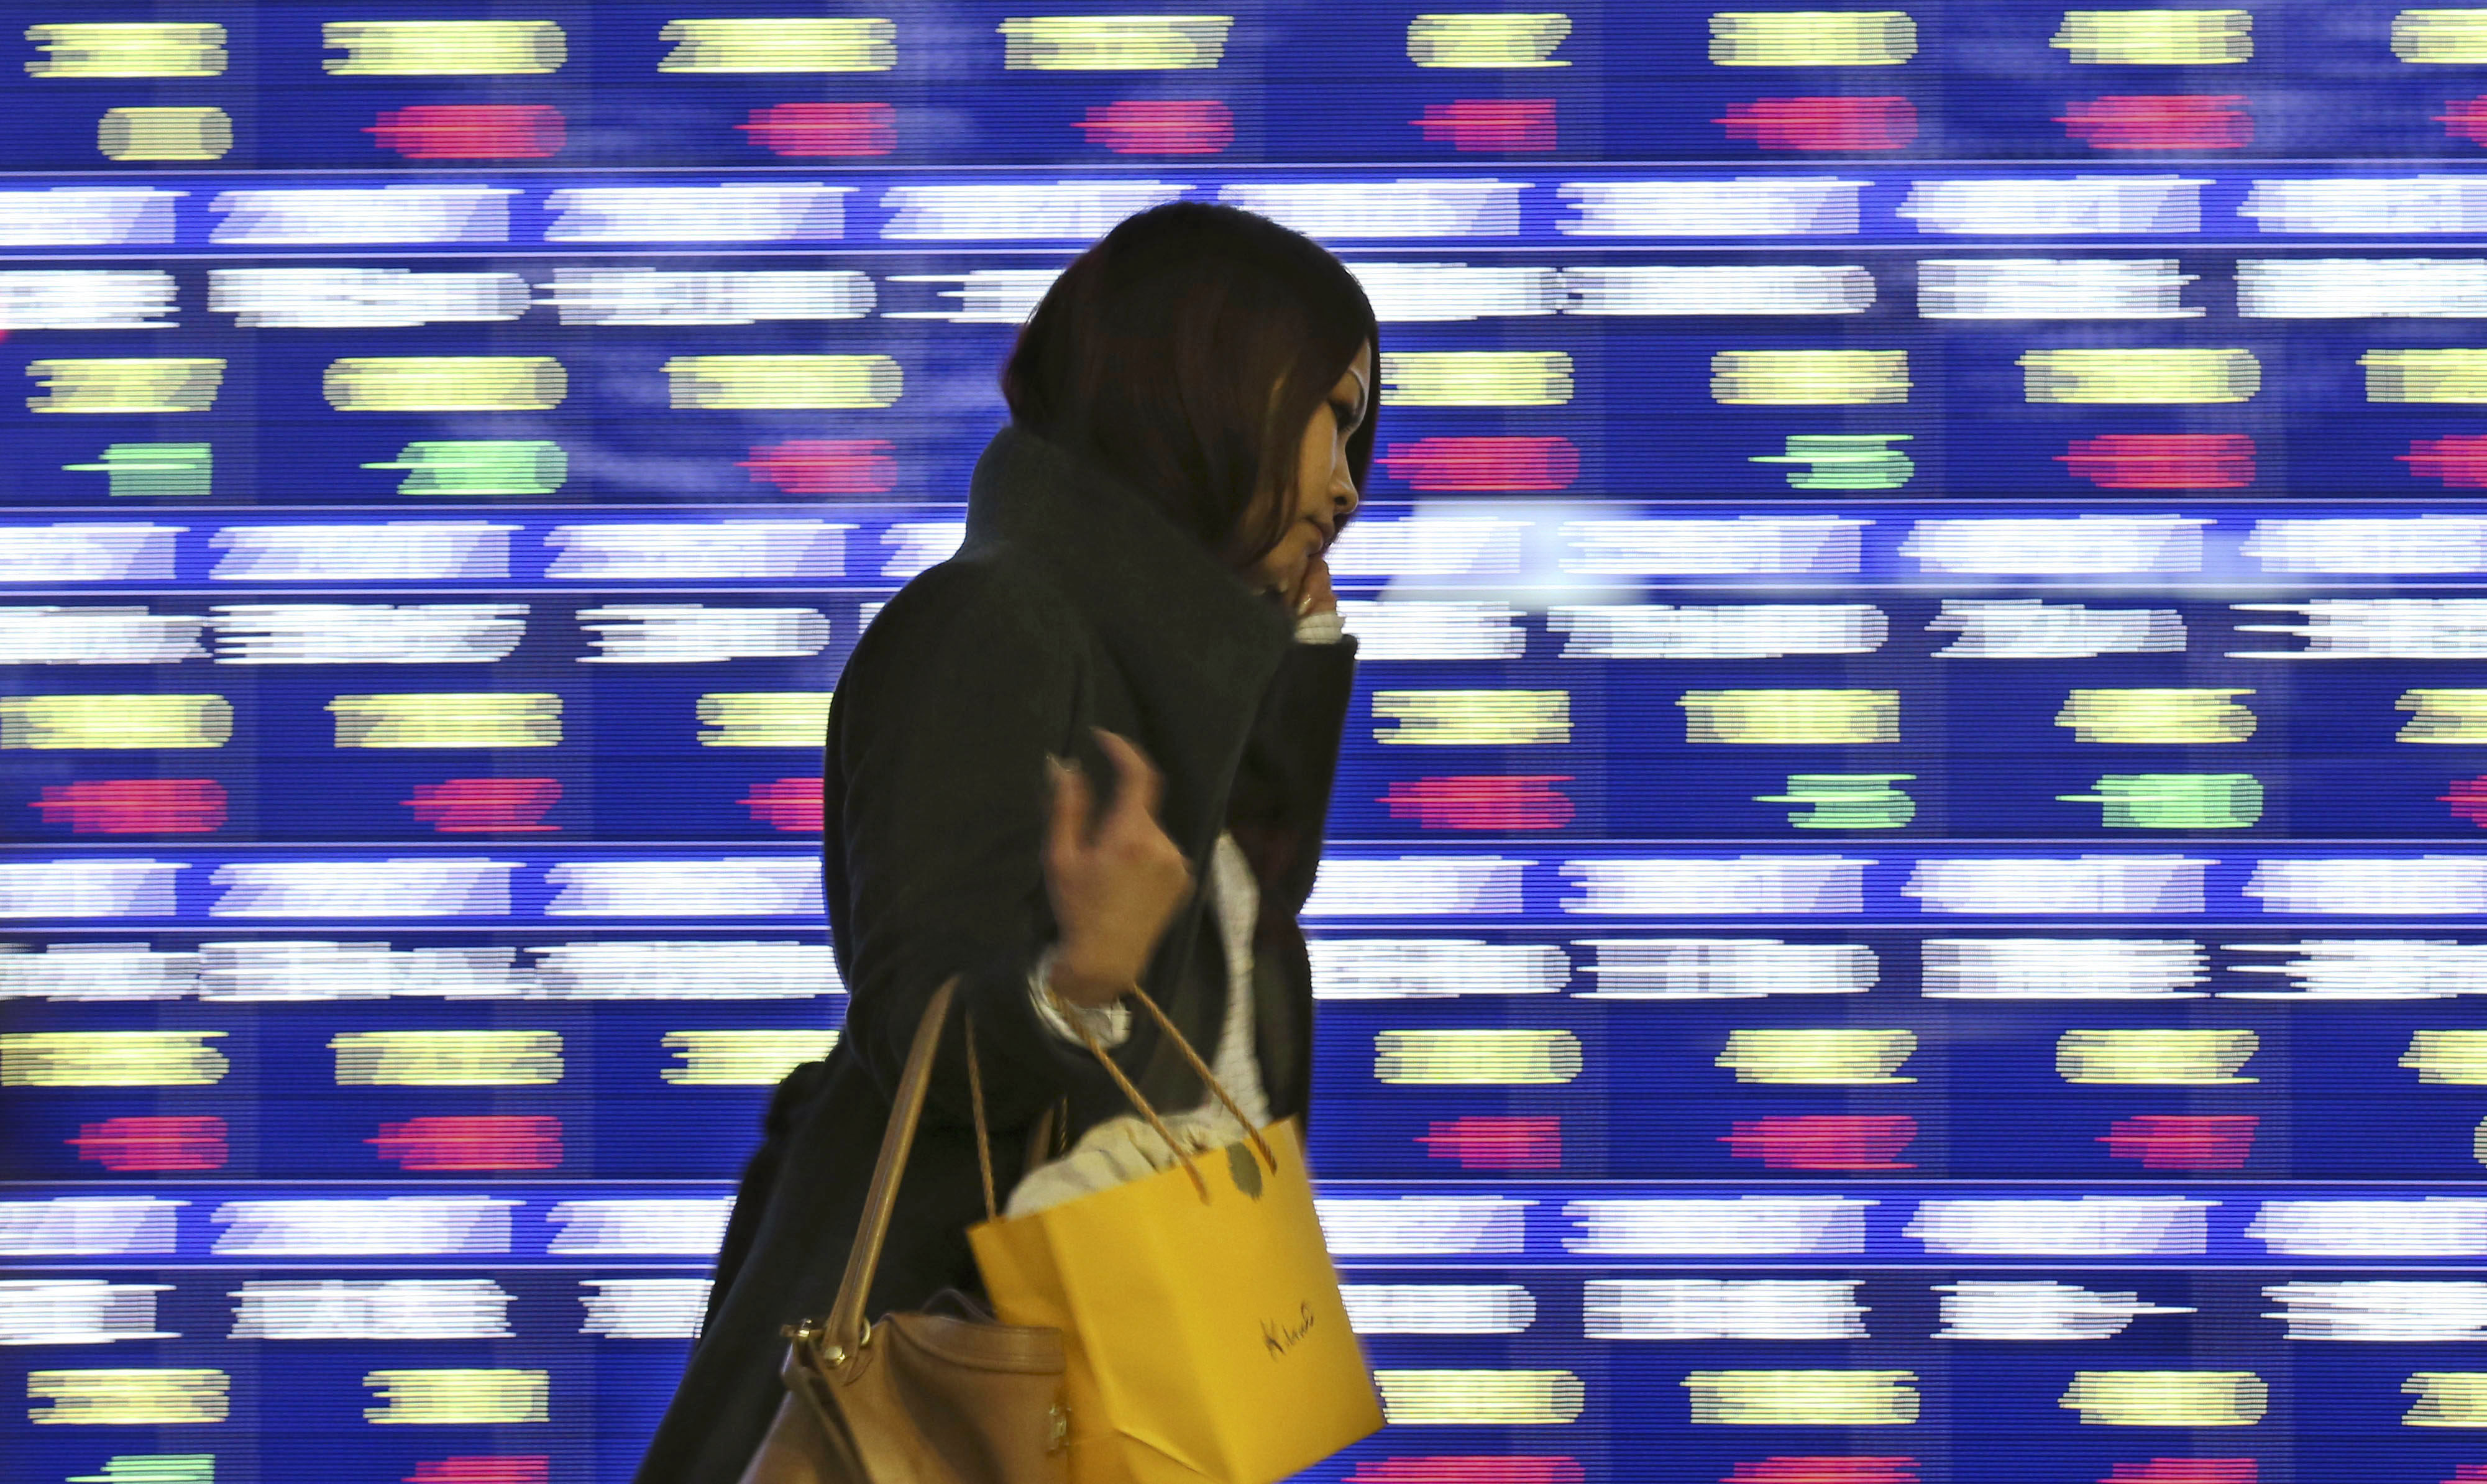 A woman walks past an electronic stock board in Tokyo. Even though much airtime has been given to criticising gender inequality at work, change has been slow. Photo: AP